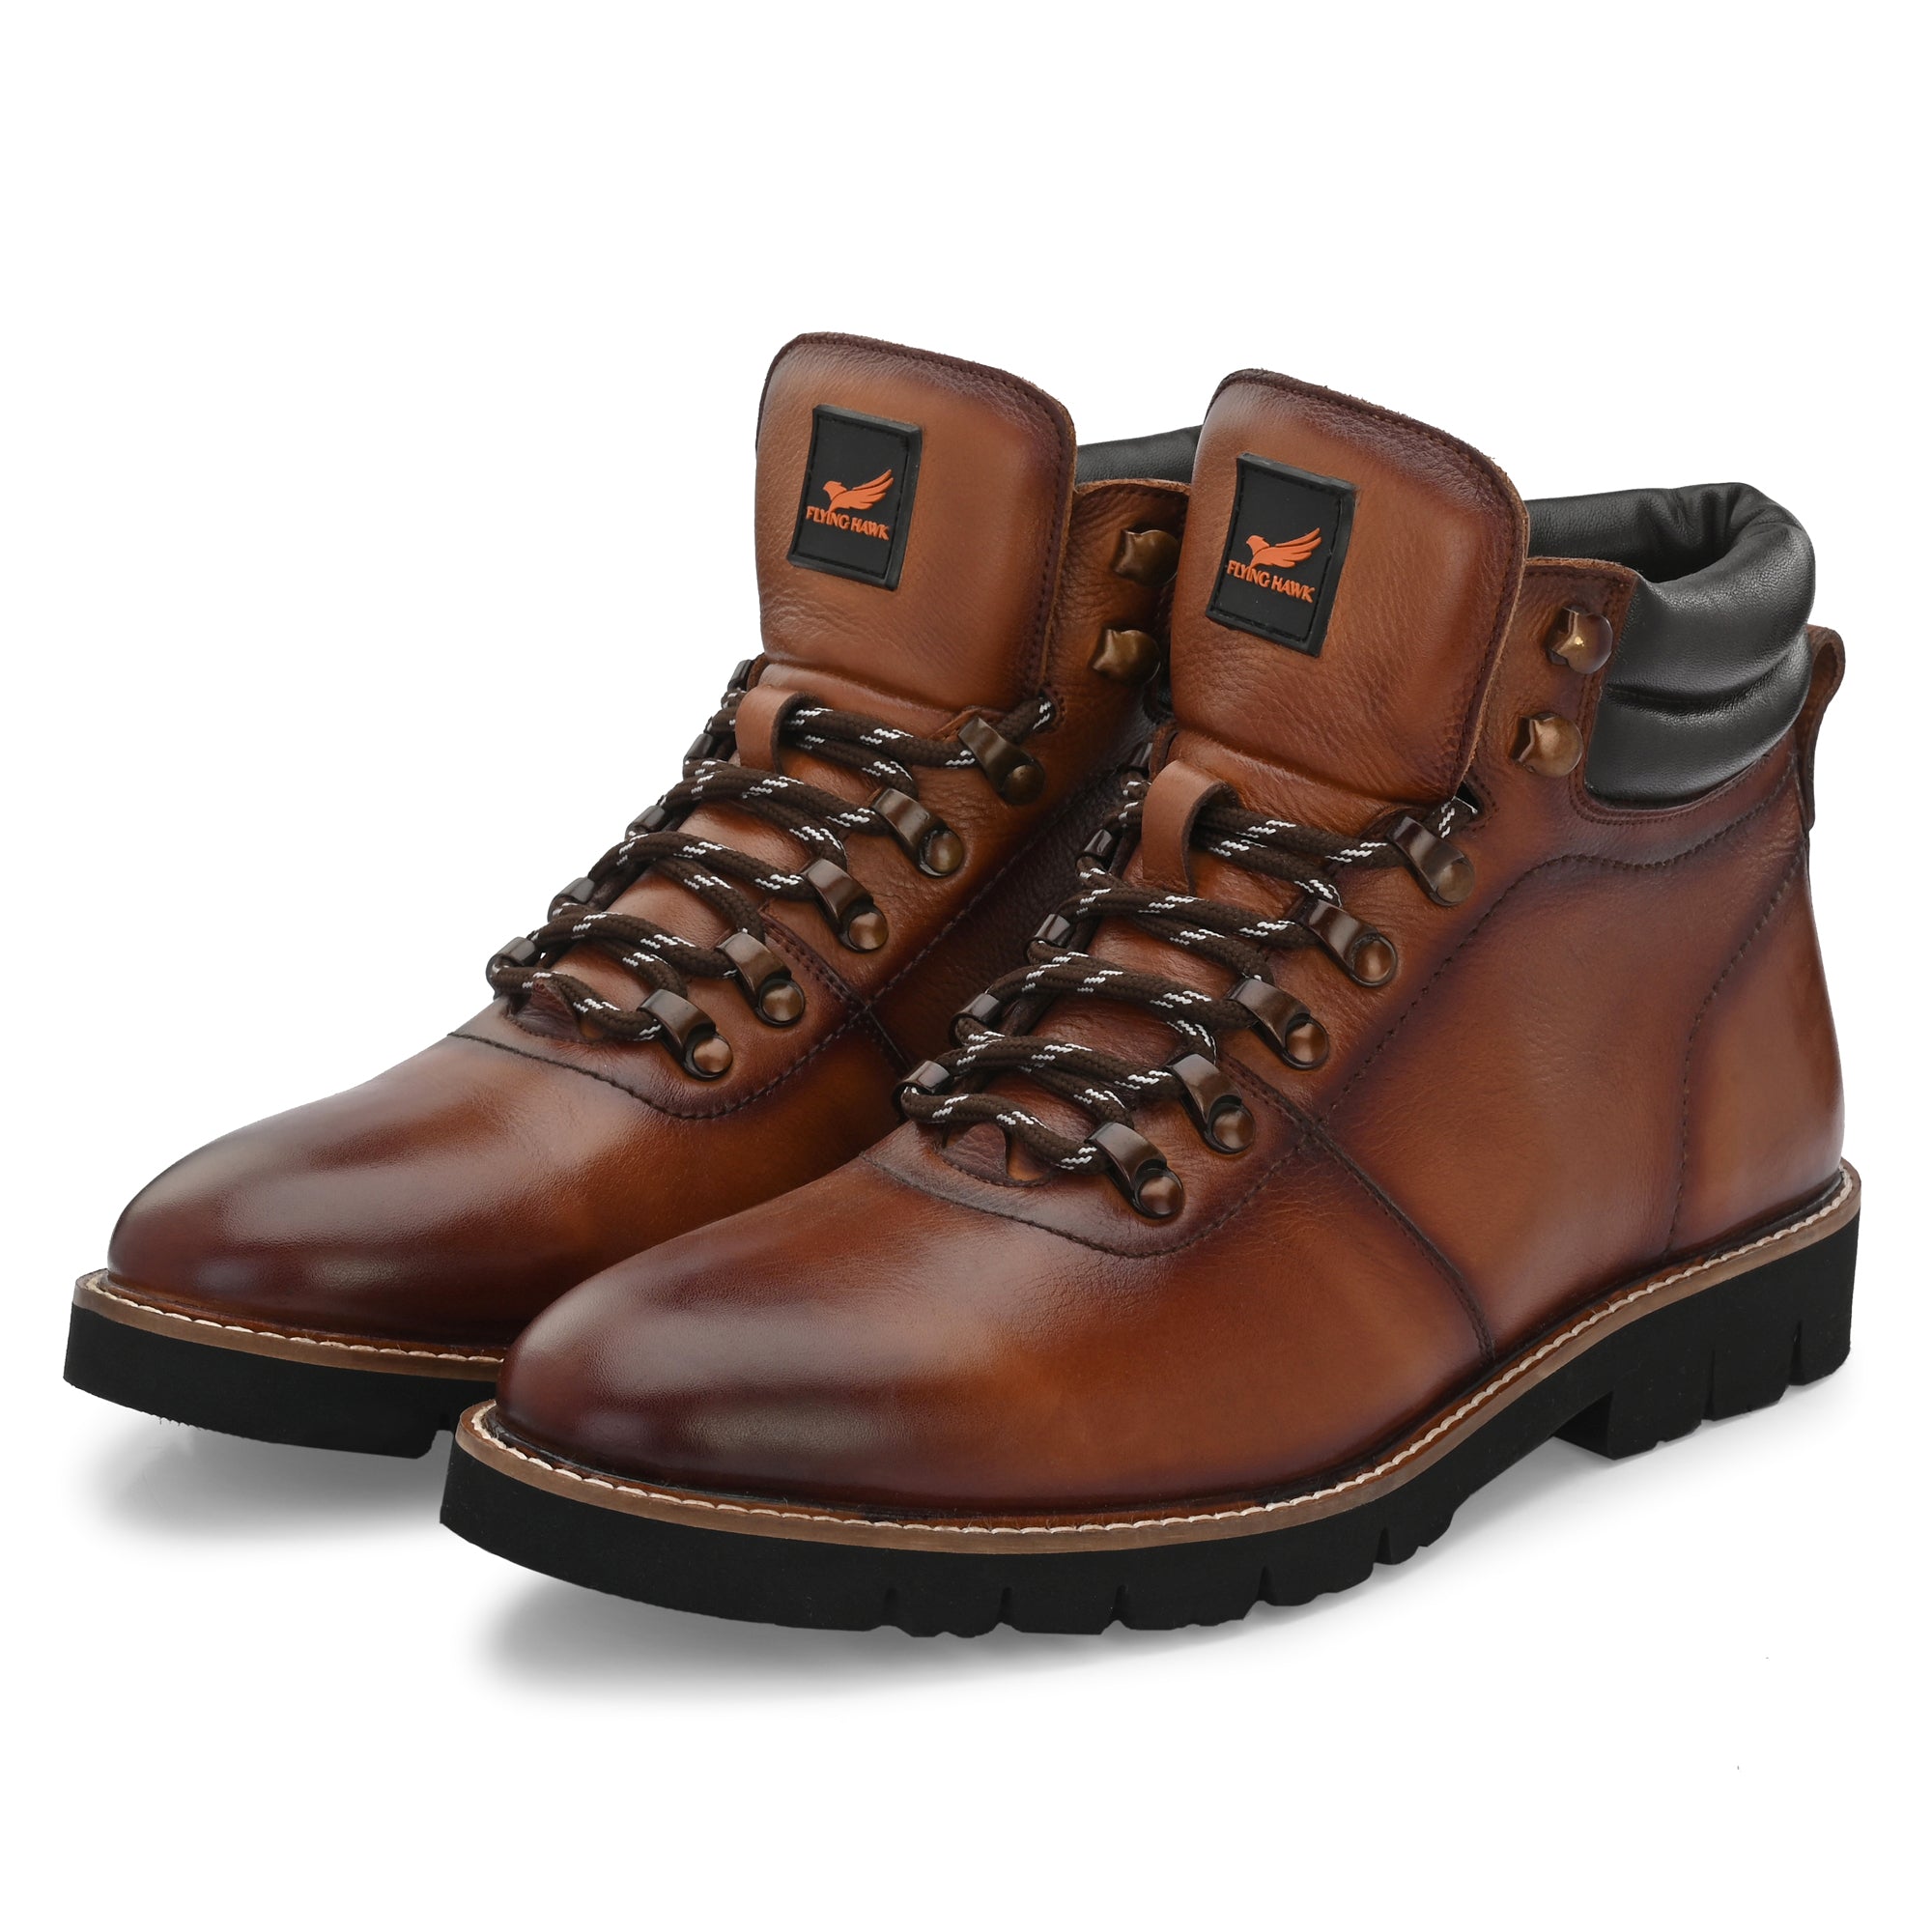 Rider Brown Boots